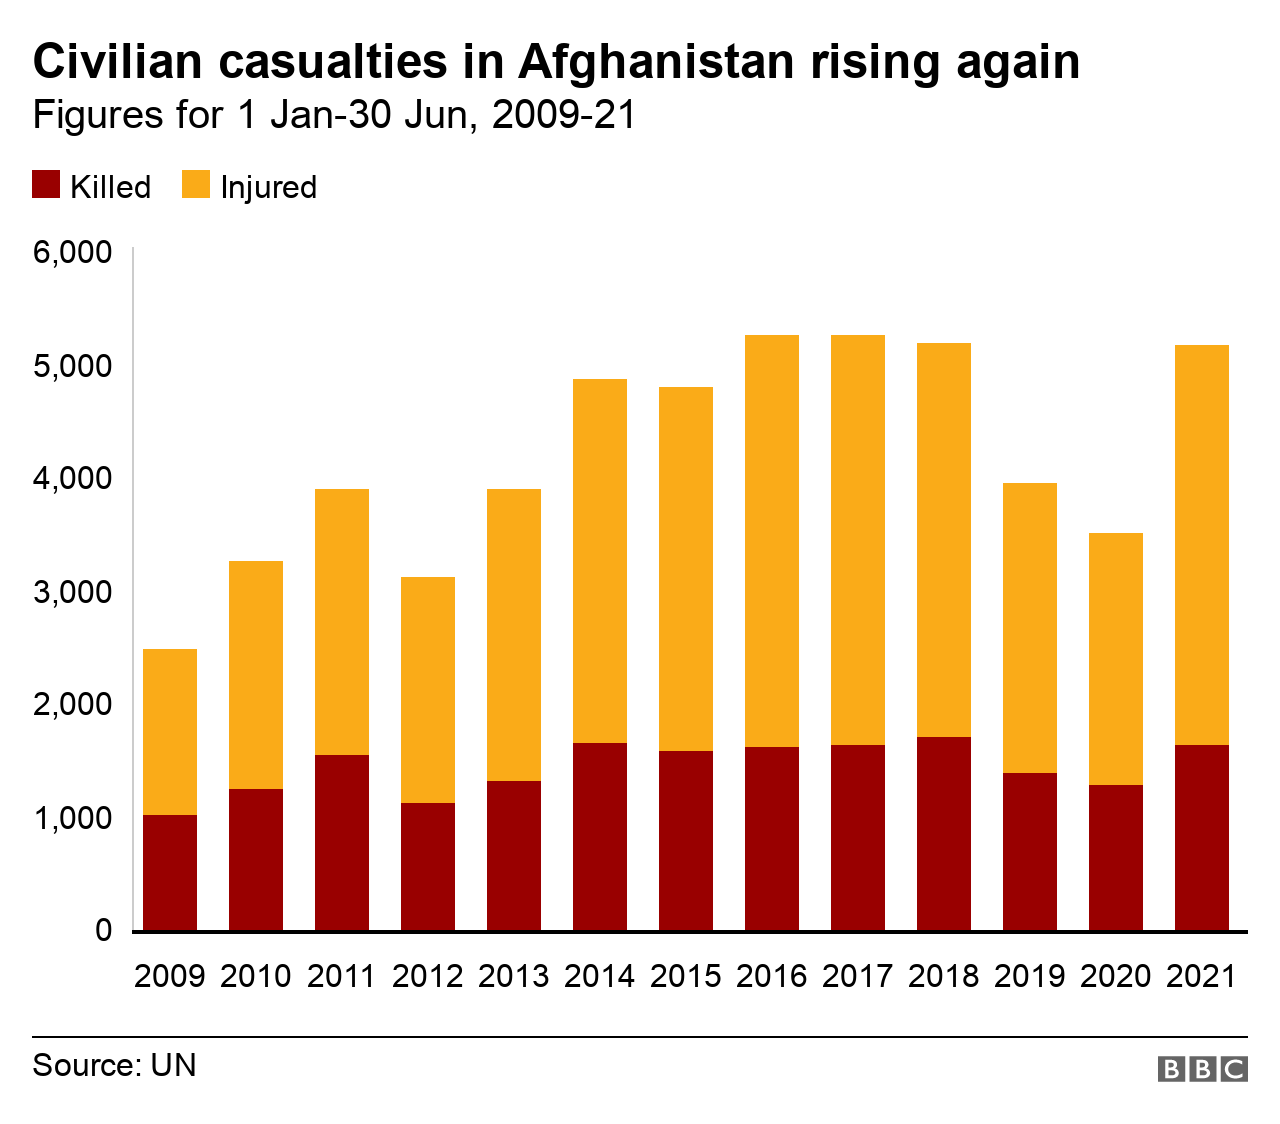 Graph showing UN figures on Afghan civilian casualties from 2009 to 2021